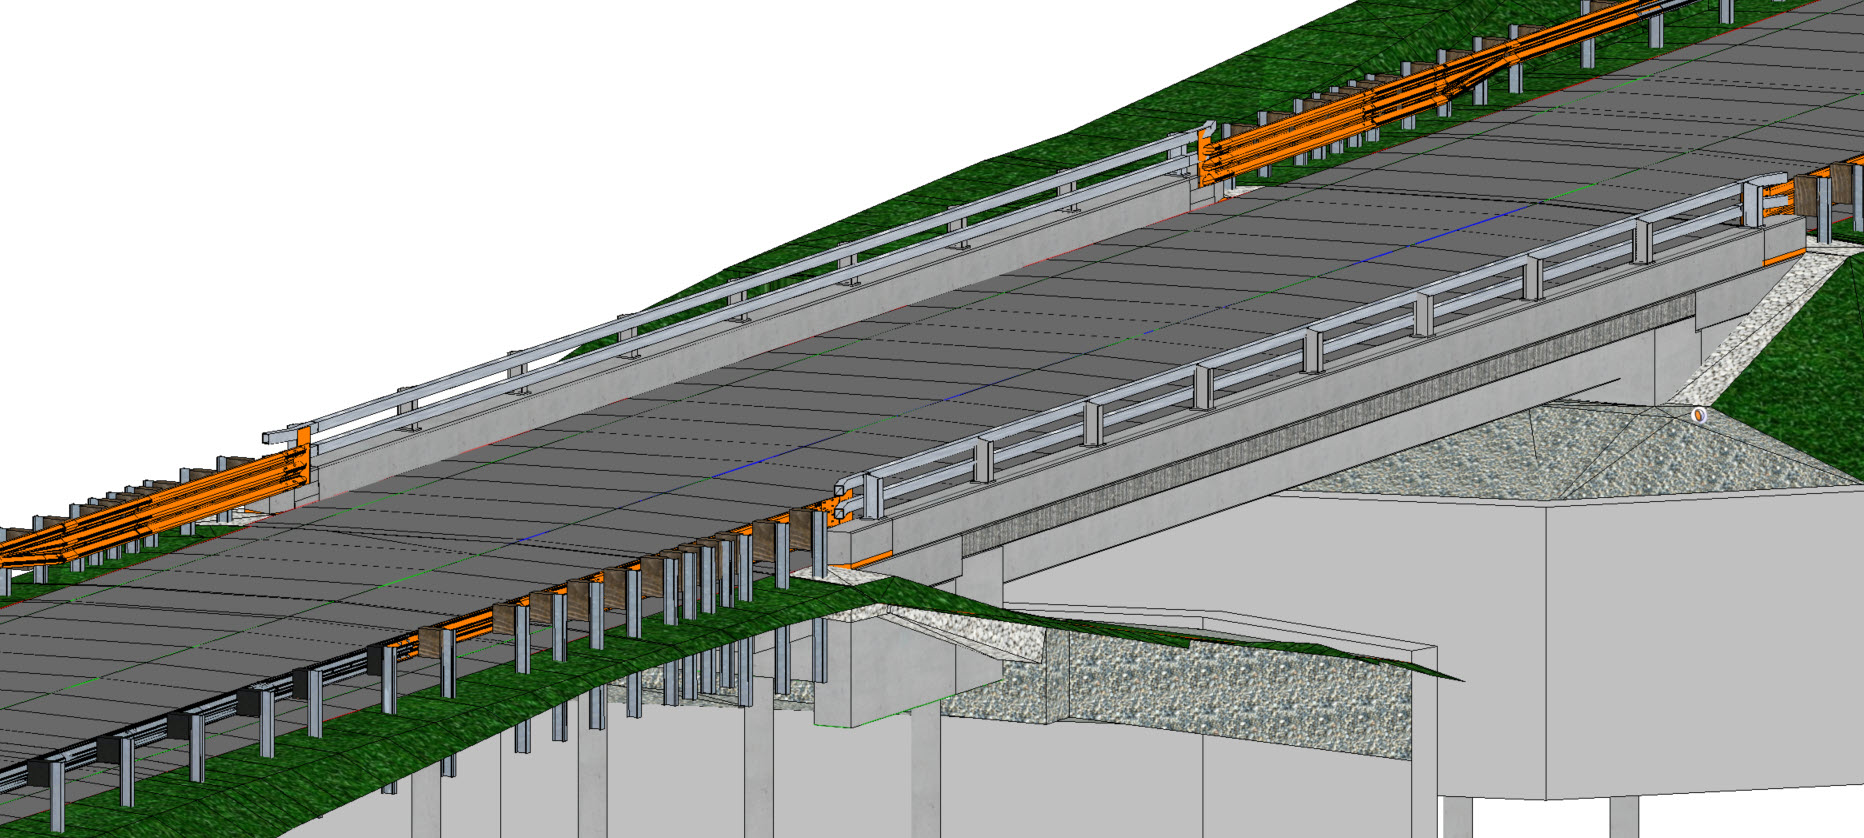 3D Model of a bridge overpass used by PennDOT